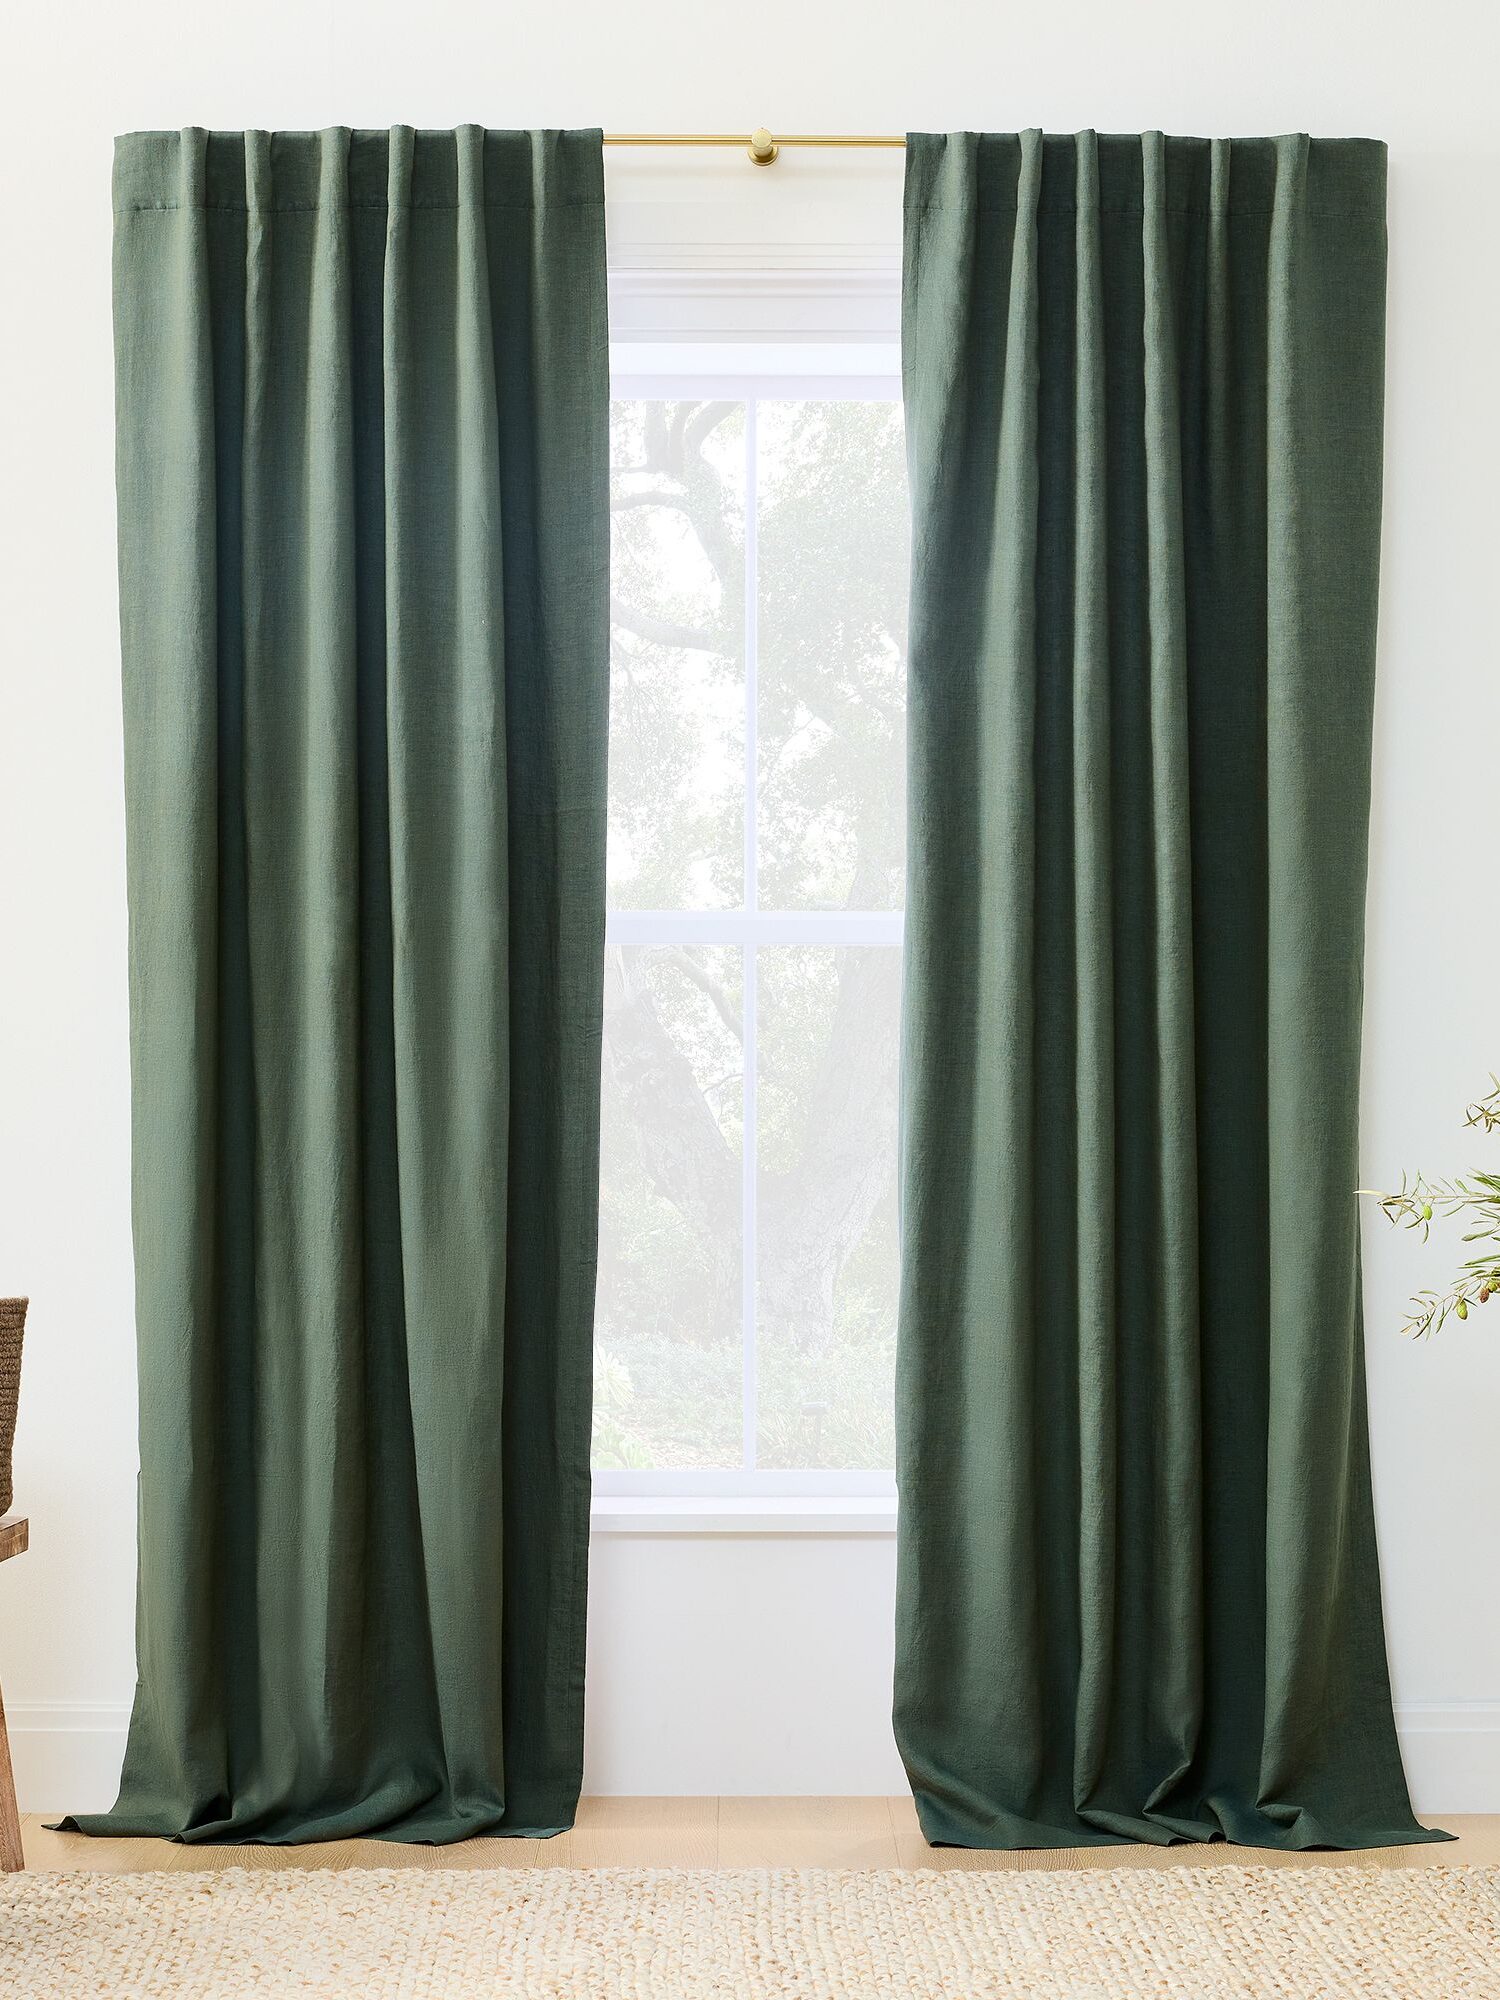 A pair of dark green curtains hangs on a rod, framing a sunlit window in a room with neutral walls and decorative plants.